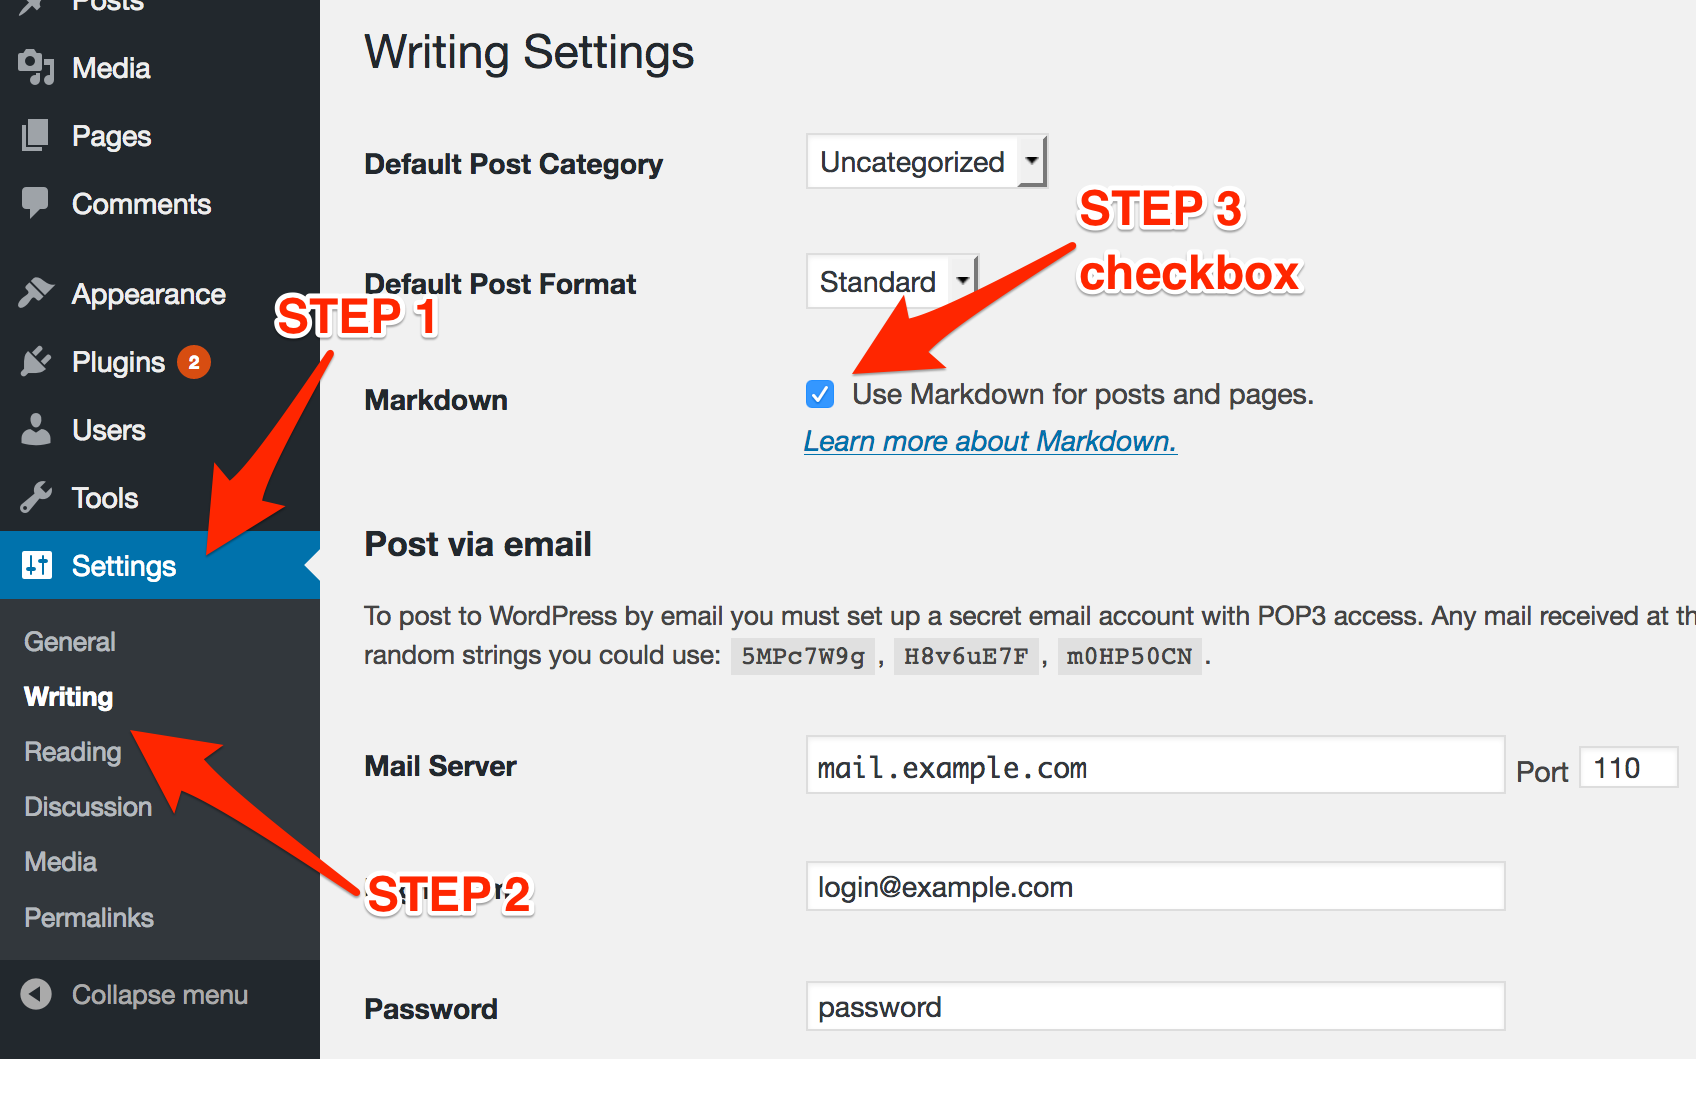 This screen shot description corresponds to installation step 3, which instructs: Enable Markdown for posts & pages, by manually checking the checkbox at: **Settings > Writing > 'Use Markdown for posts and pages'**